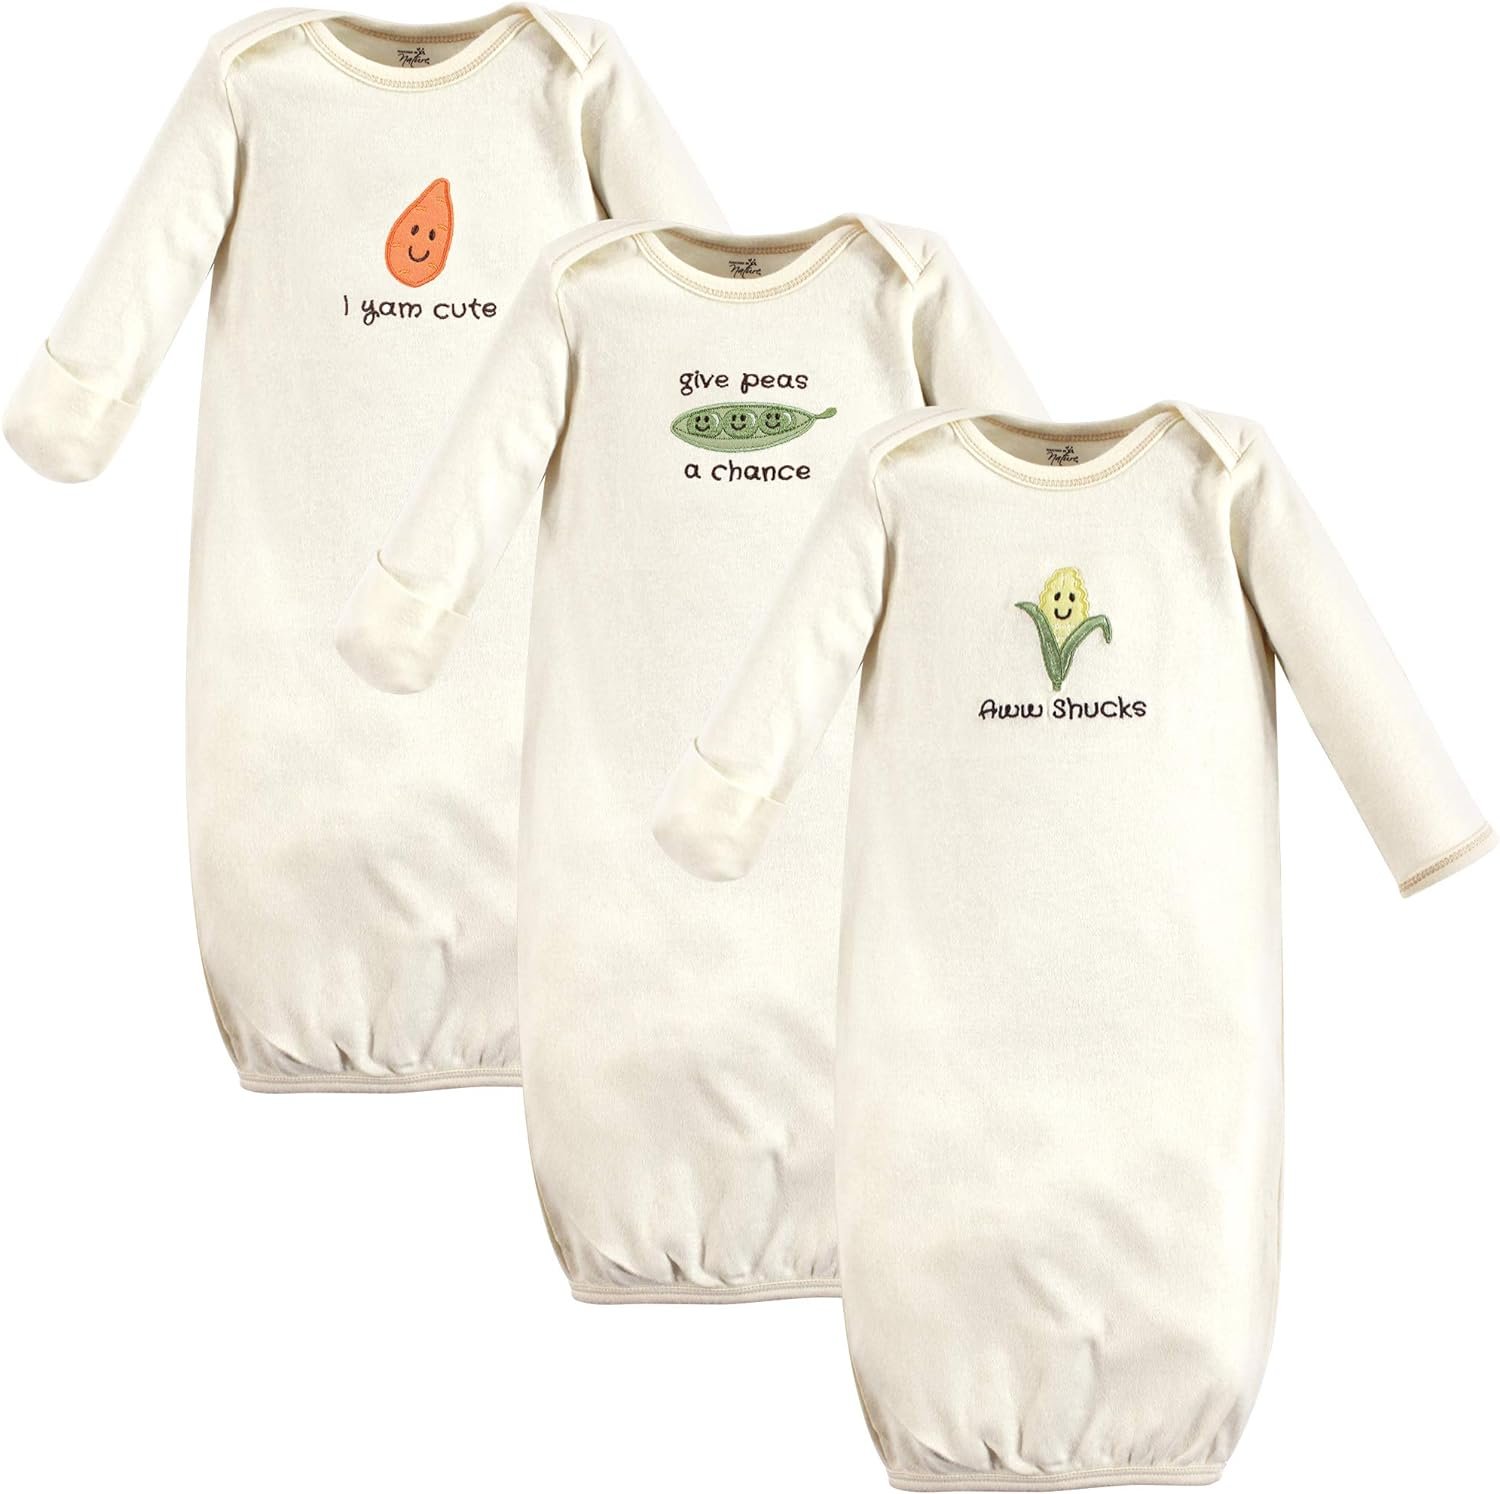 Touched by Nature Unisex Baby Organic Cotton Gowns Review